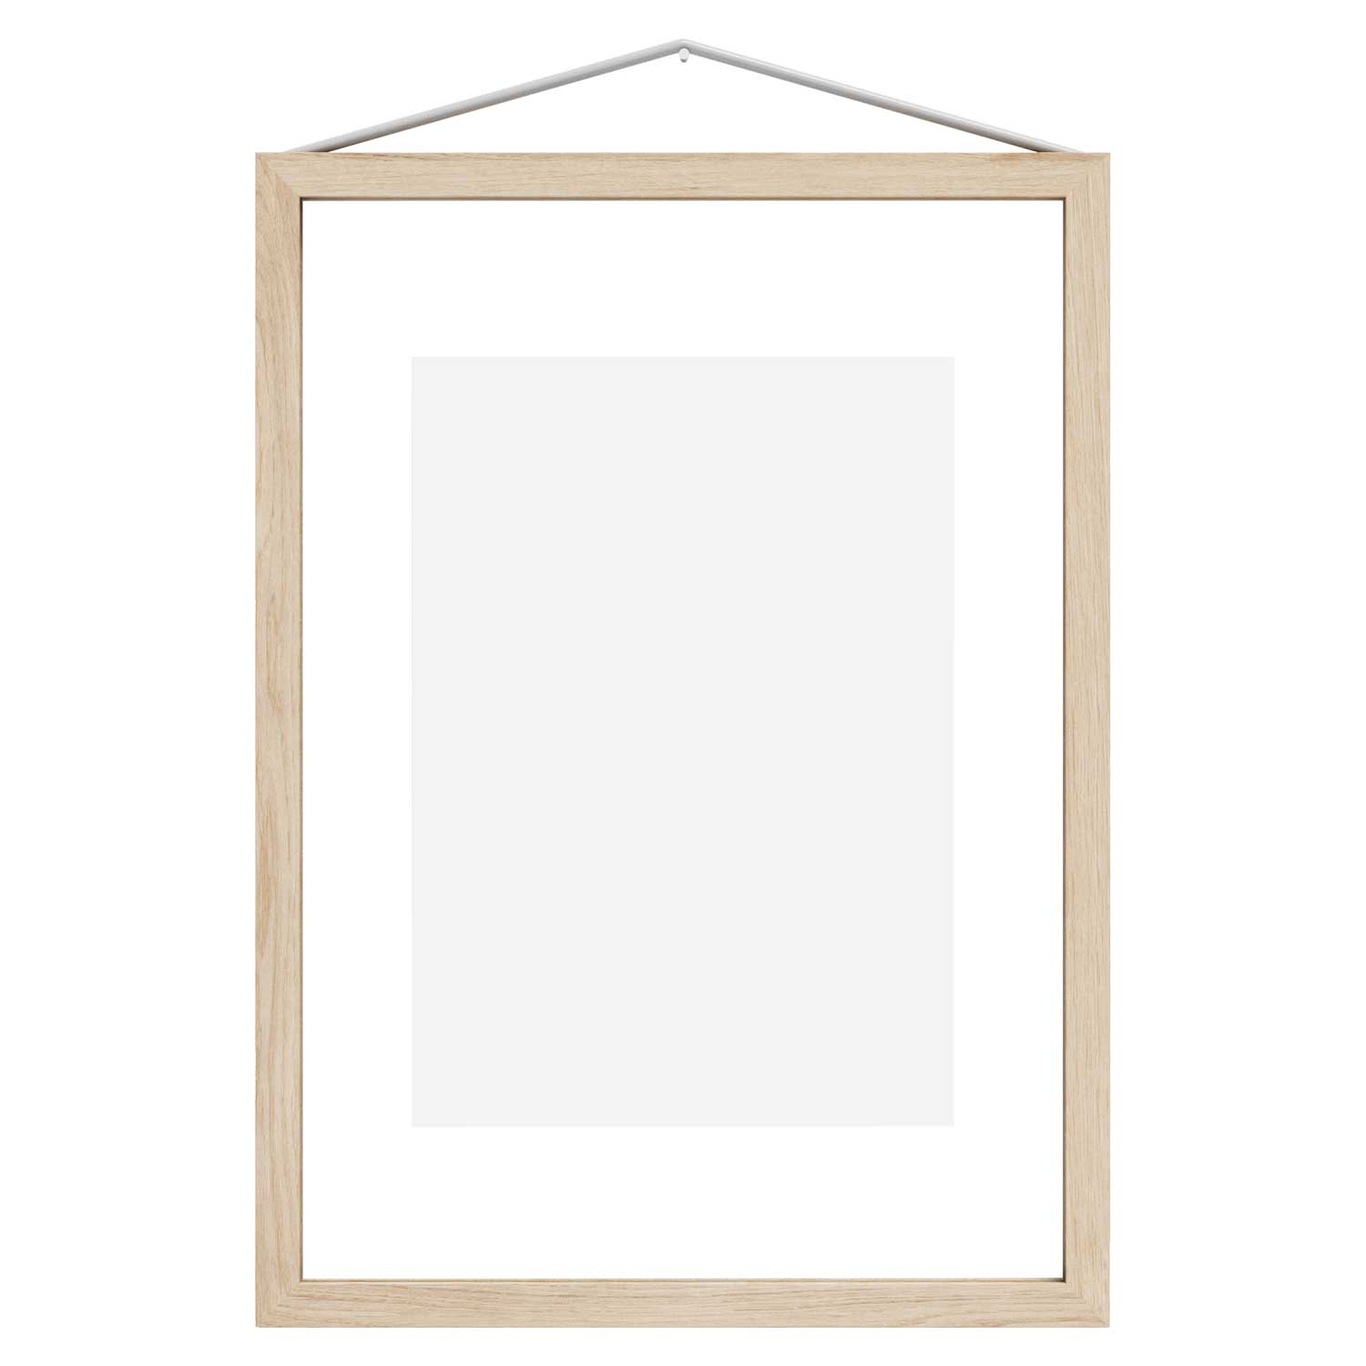 Frame A4 Ramme 23x31,7 cm, Ask